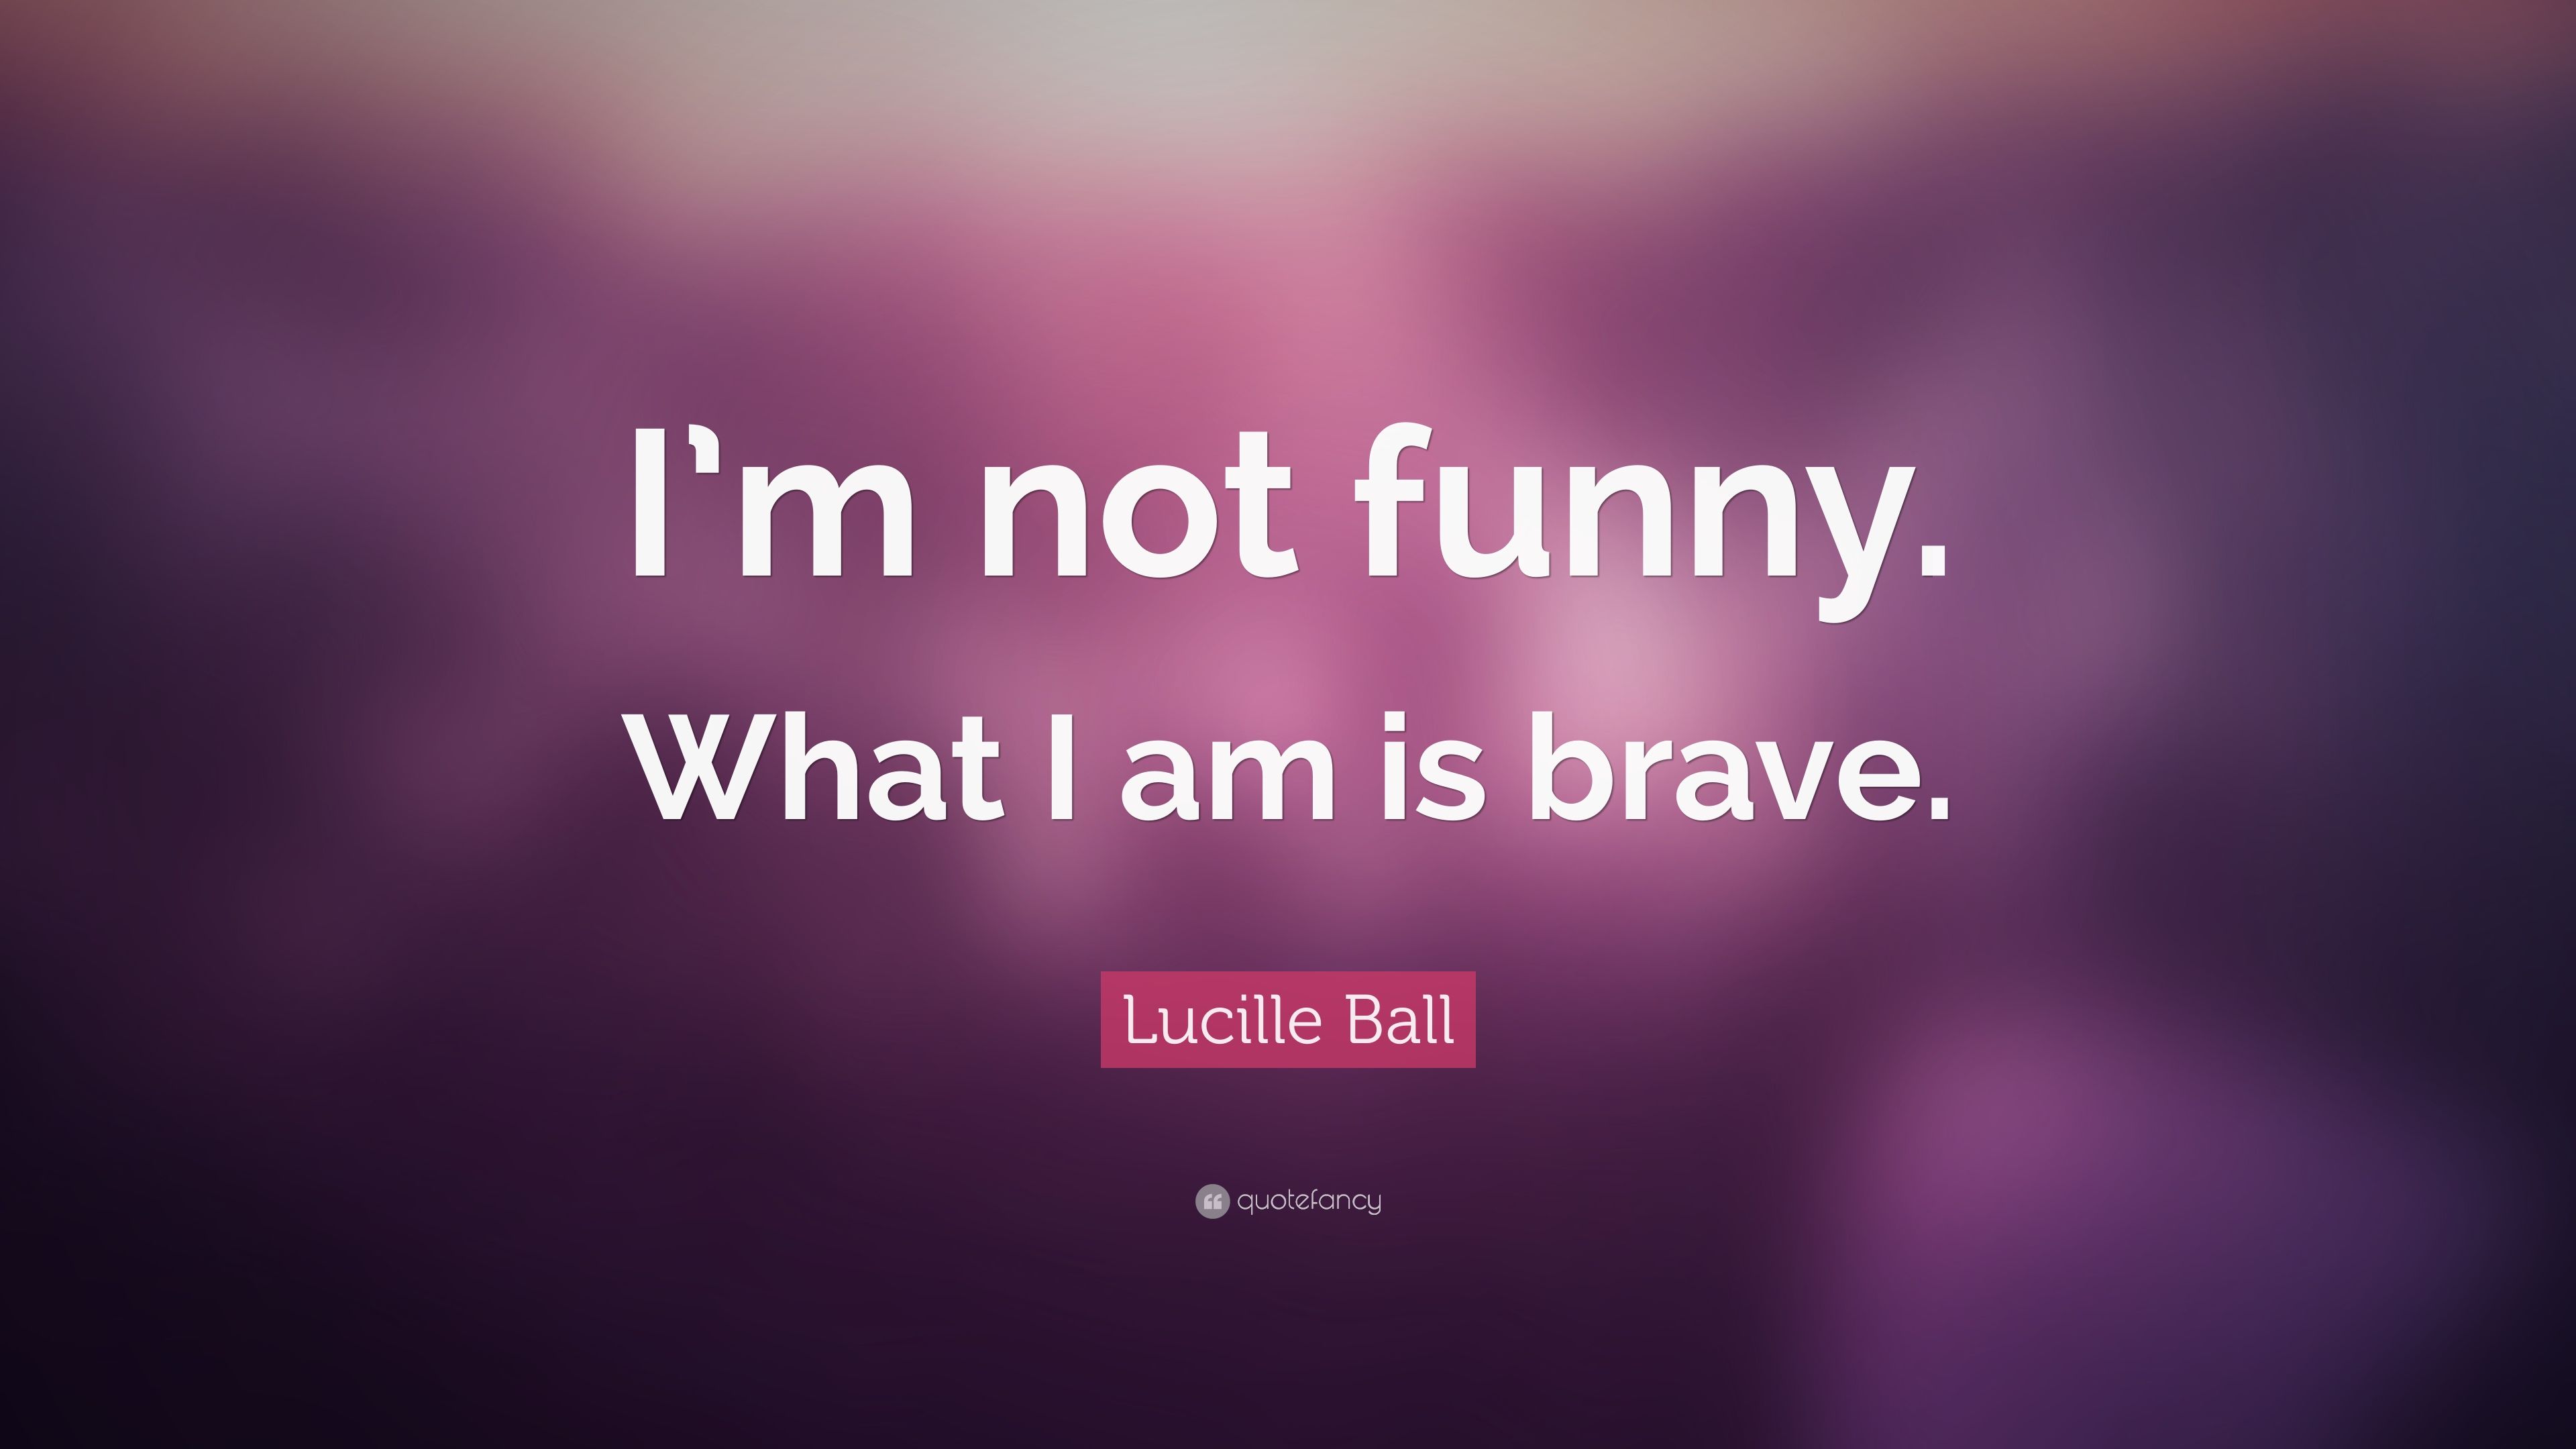 Lucille Ball Quote: “I'm not funny. What I am is brave.” (9 wallpaper)